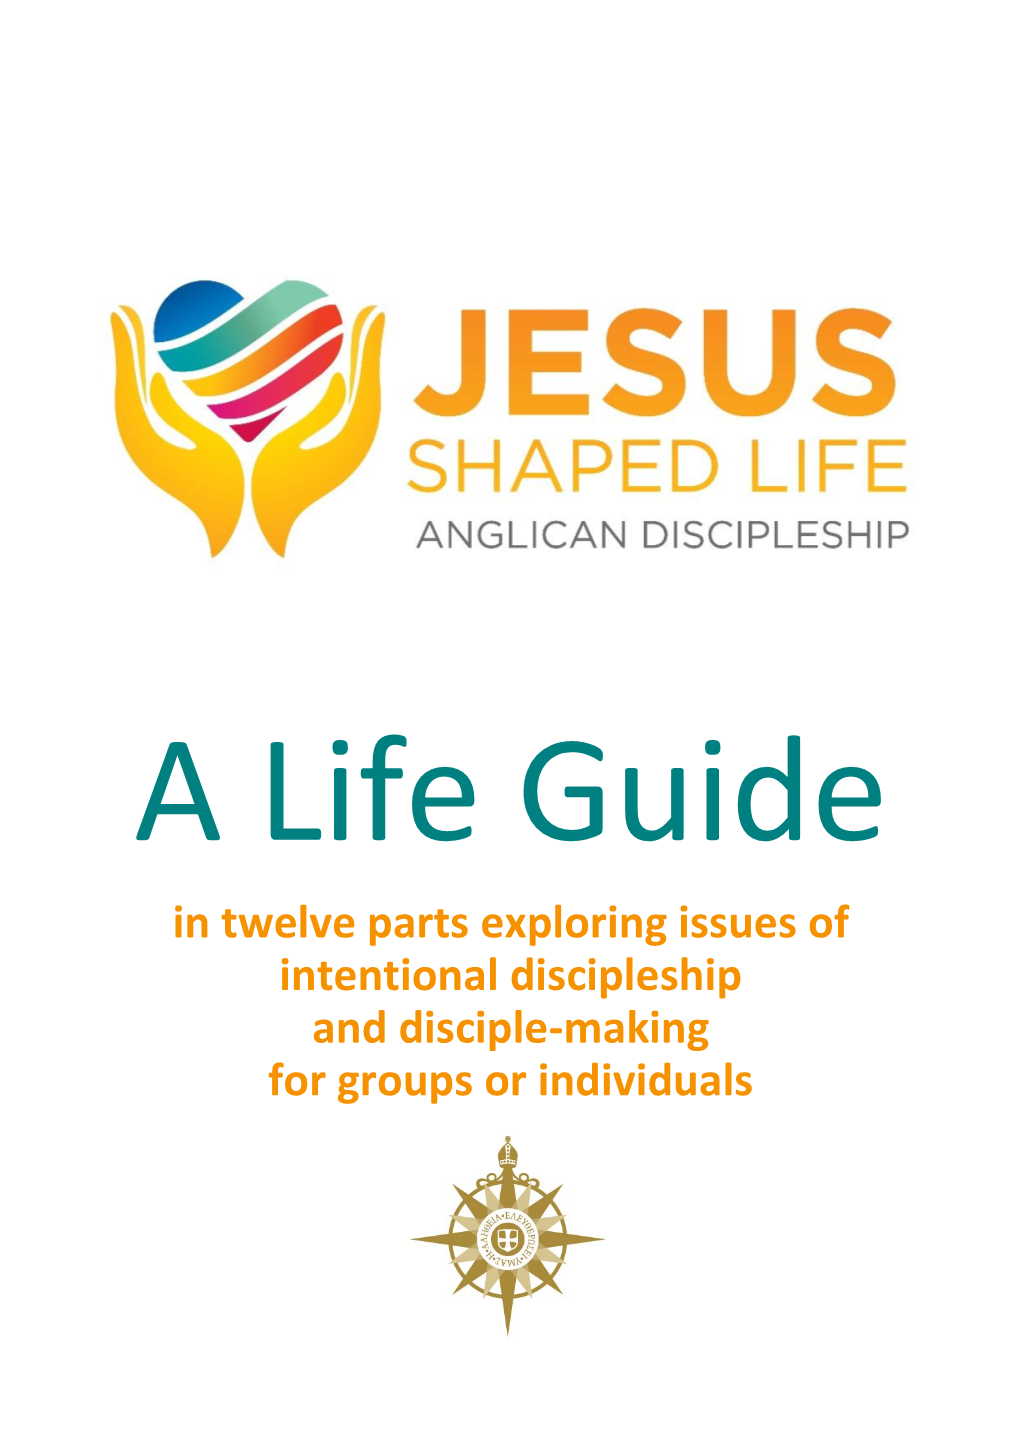 In Twelve Parts Exploring Issues of Intentional Discipleship and Disciple-Making for Groups Or Individuals